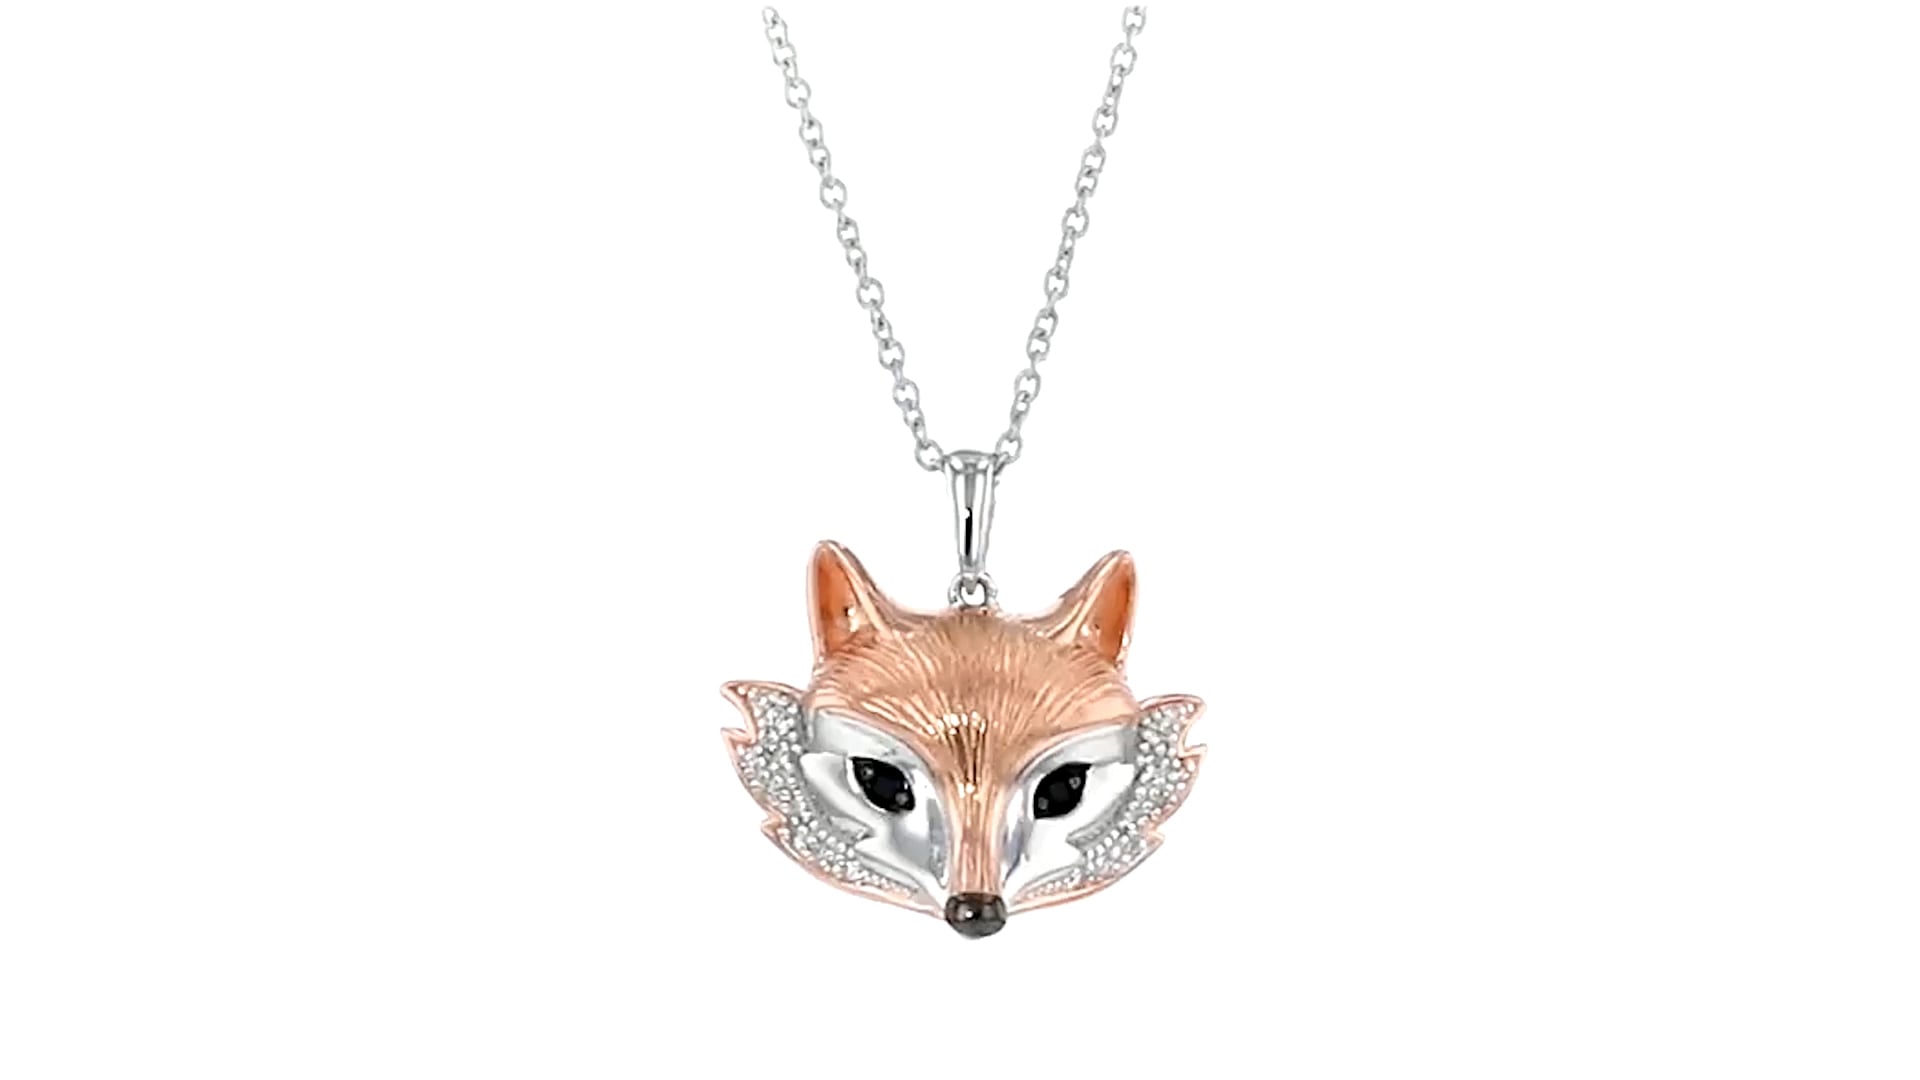 Two-Tone Sterling Silver Fox Pendant Necklace with Diamond and Sapphire Accents on Vimeo